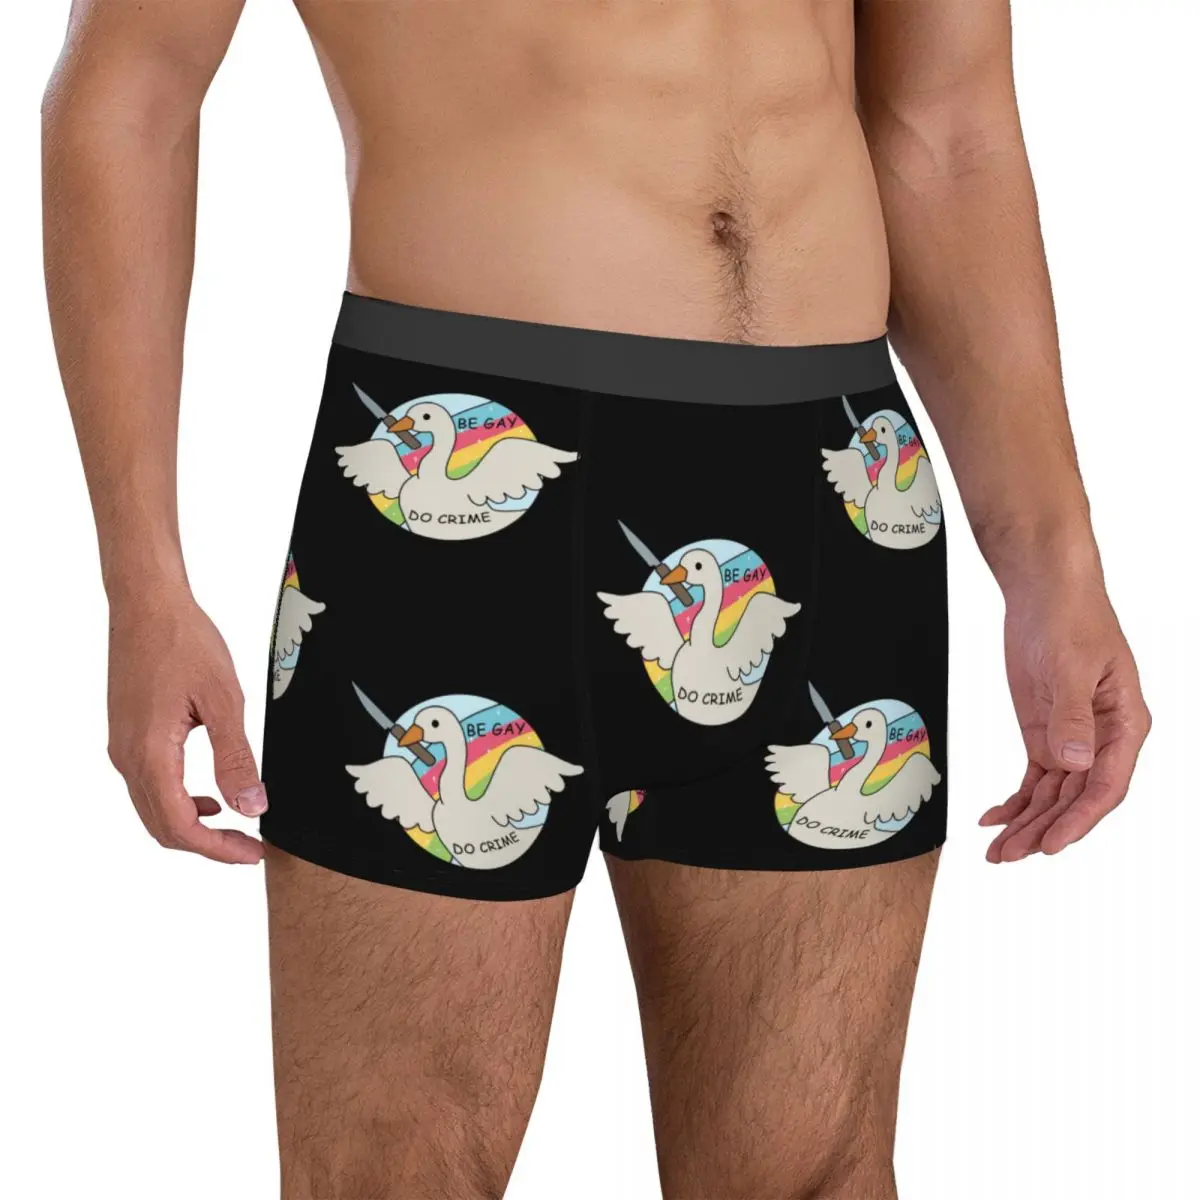 

Be Gay Do Crime Goose Underwear proud gay knife rainbow Cute Panties Printed Boxer Brief 3D Pouch Men's Plus Size Boxer Shorts